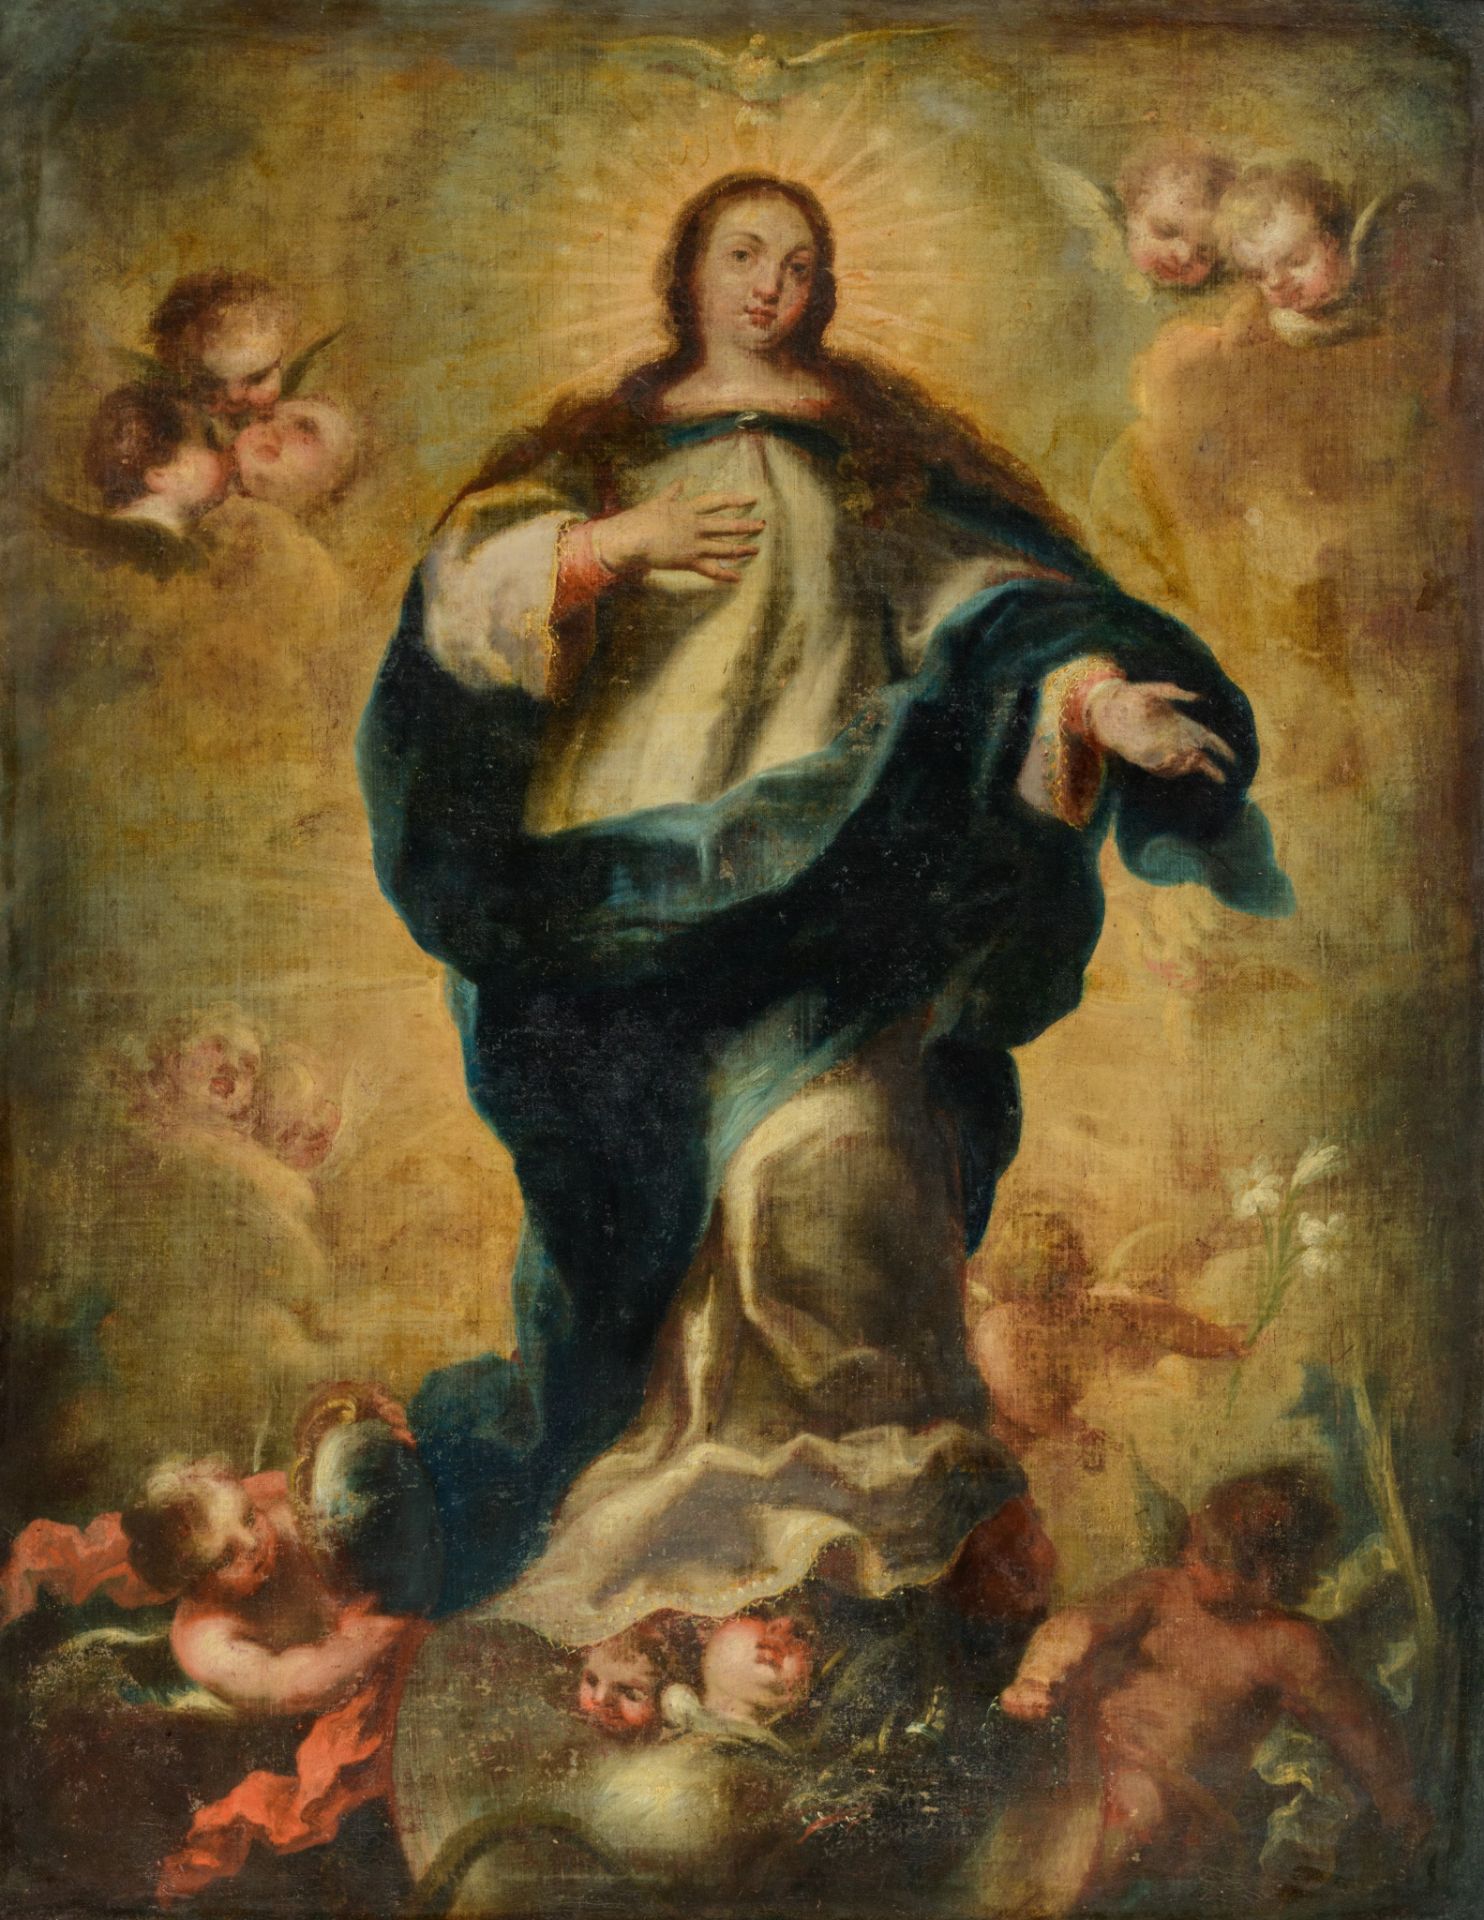 The Madonna and Child surrounded by angels, after Murillo, 18thC, 82 x 106 cm